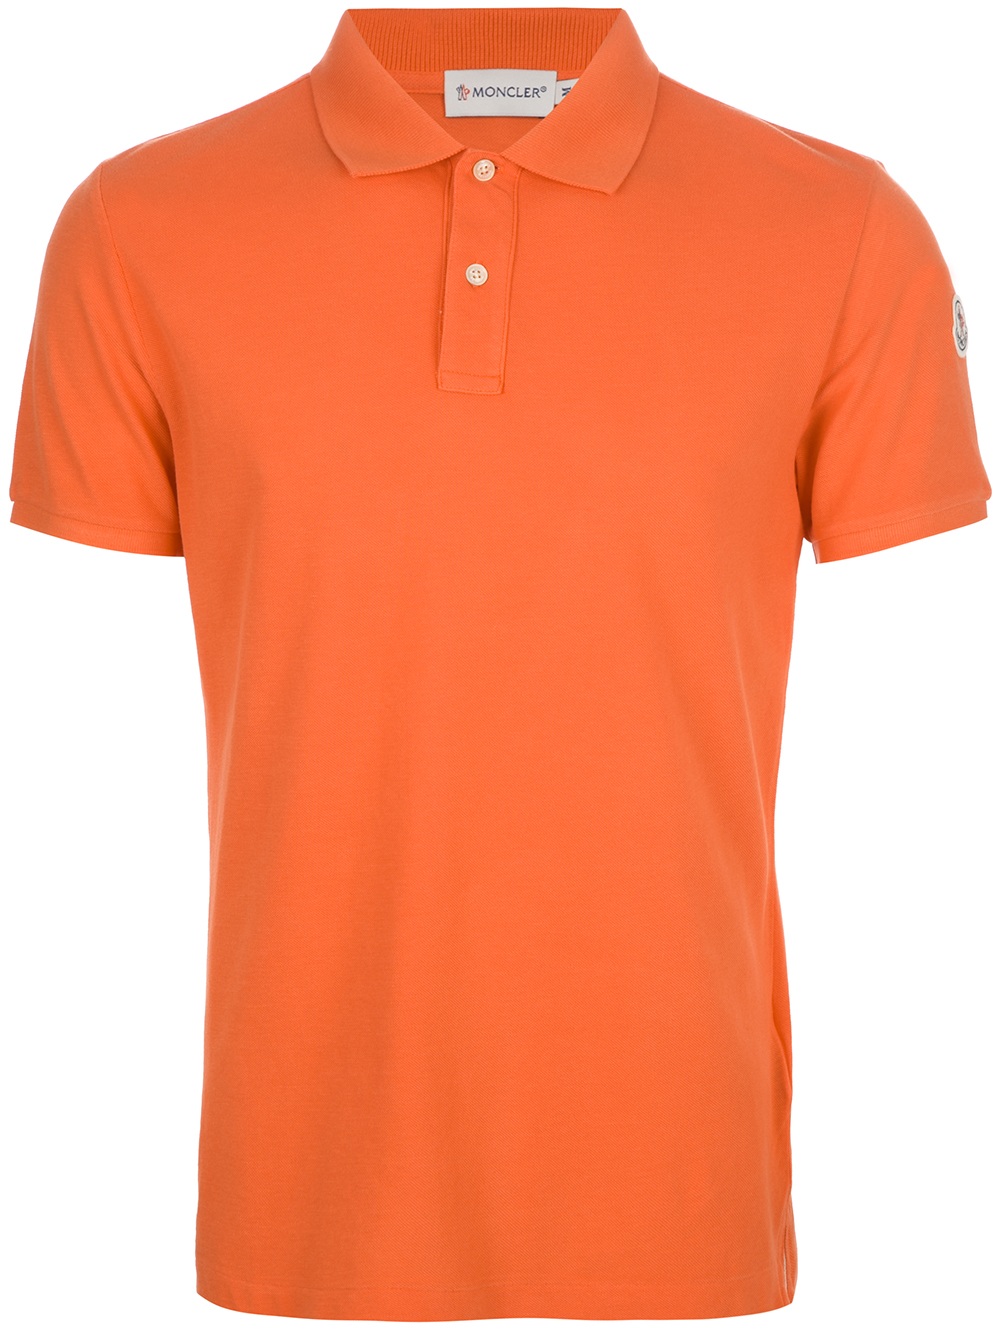 Moncler Classic Polo Shirt in Orange for Men - Lyst